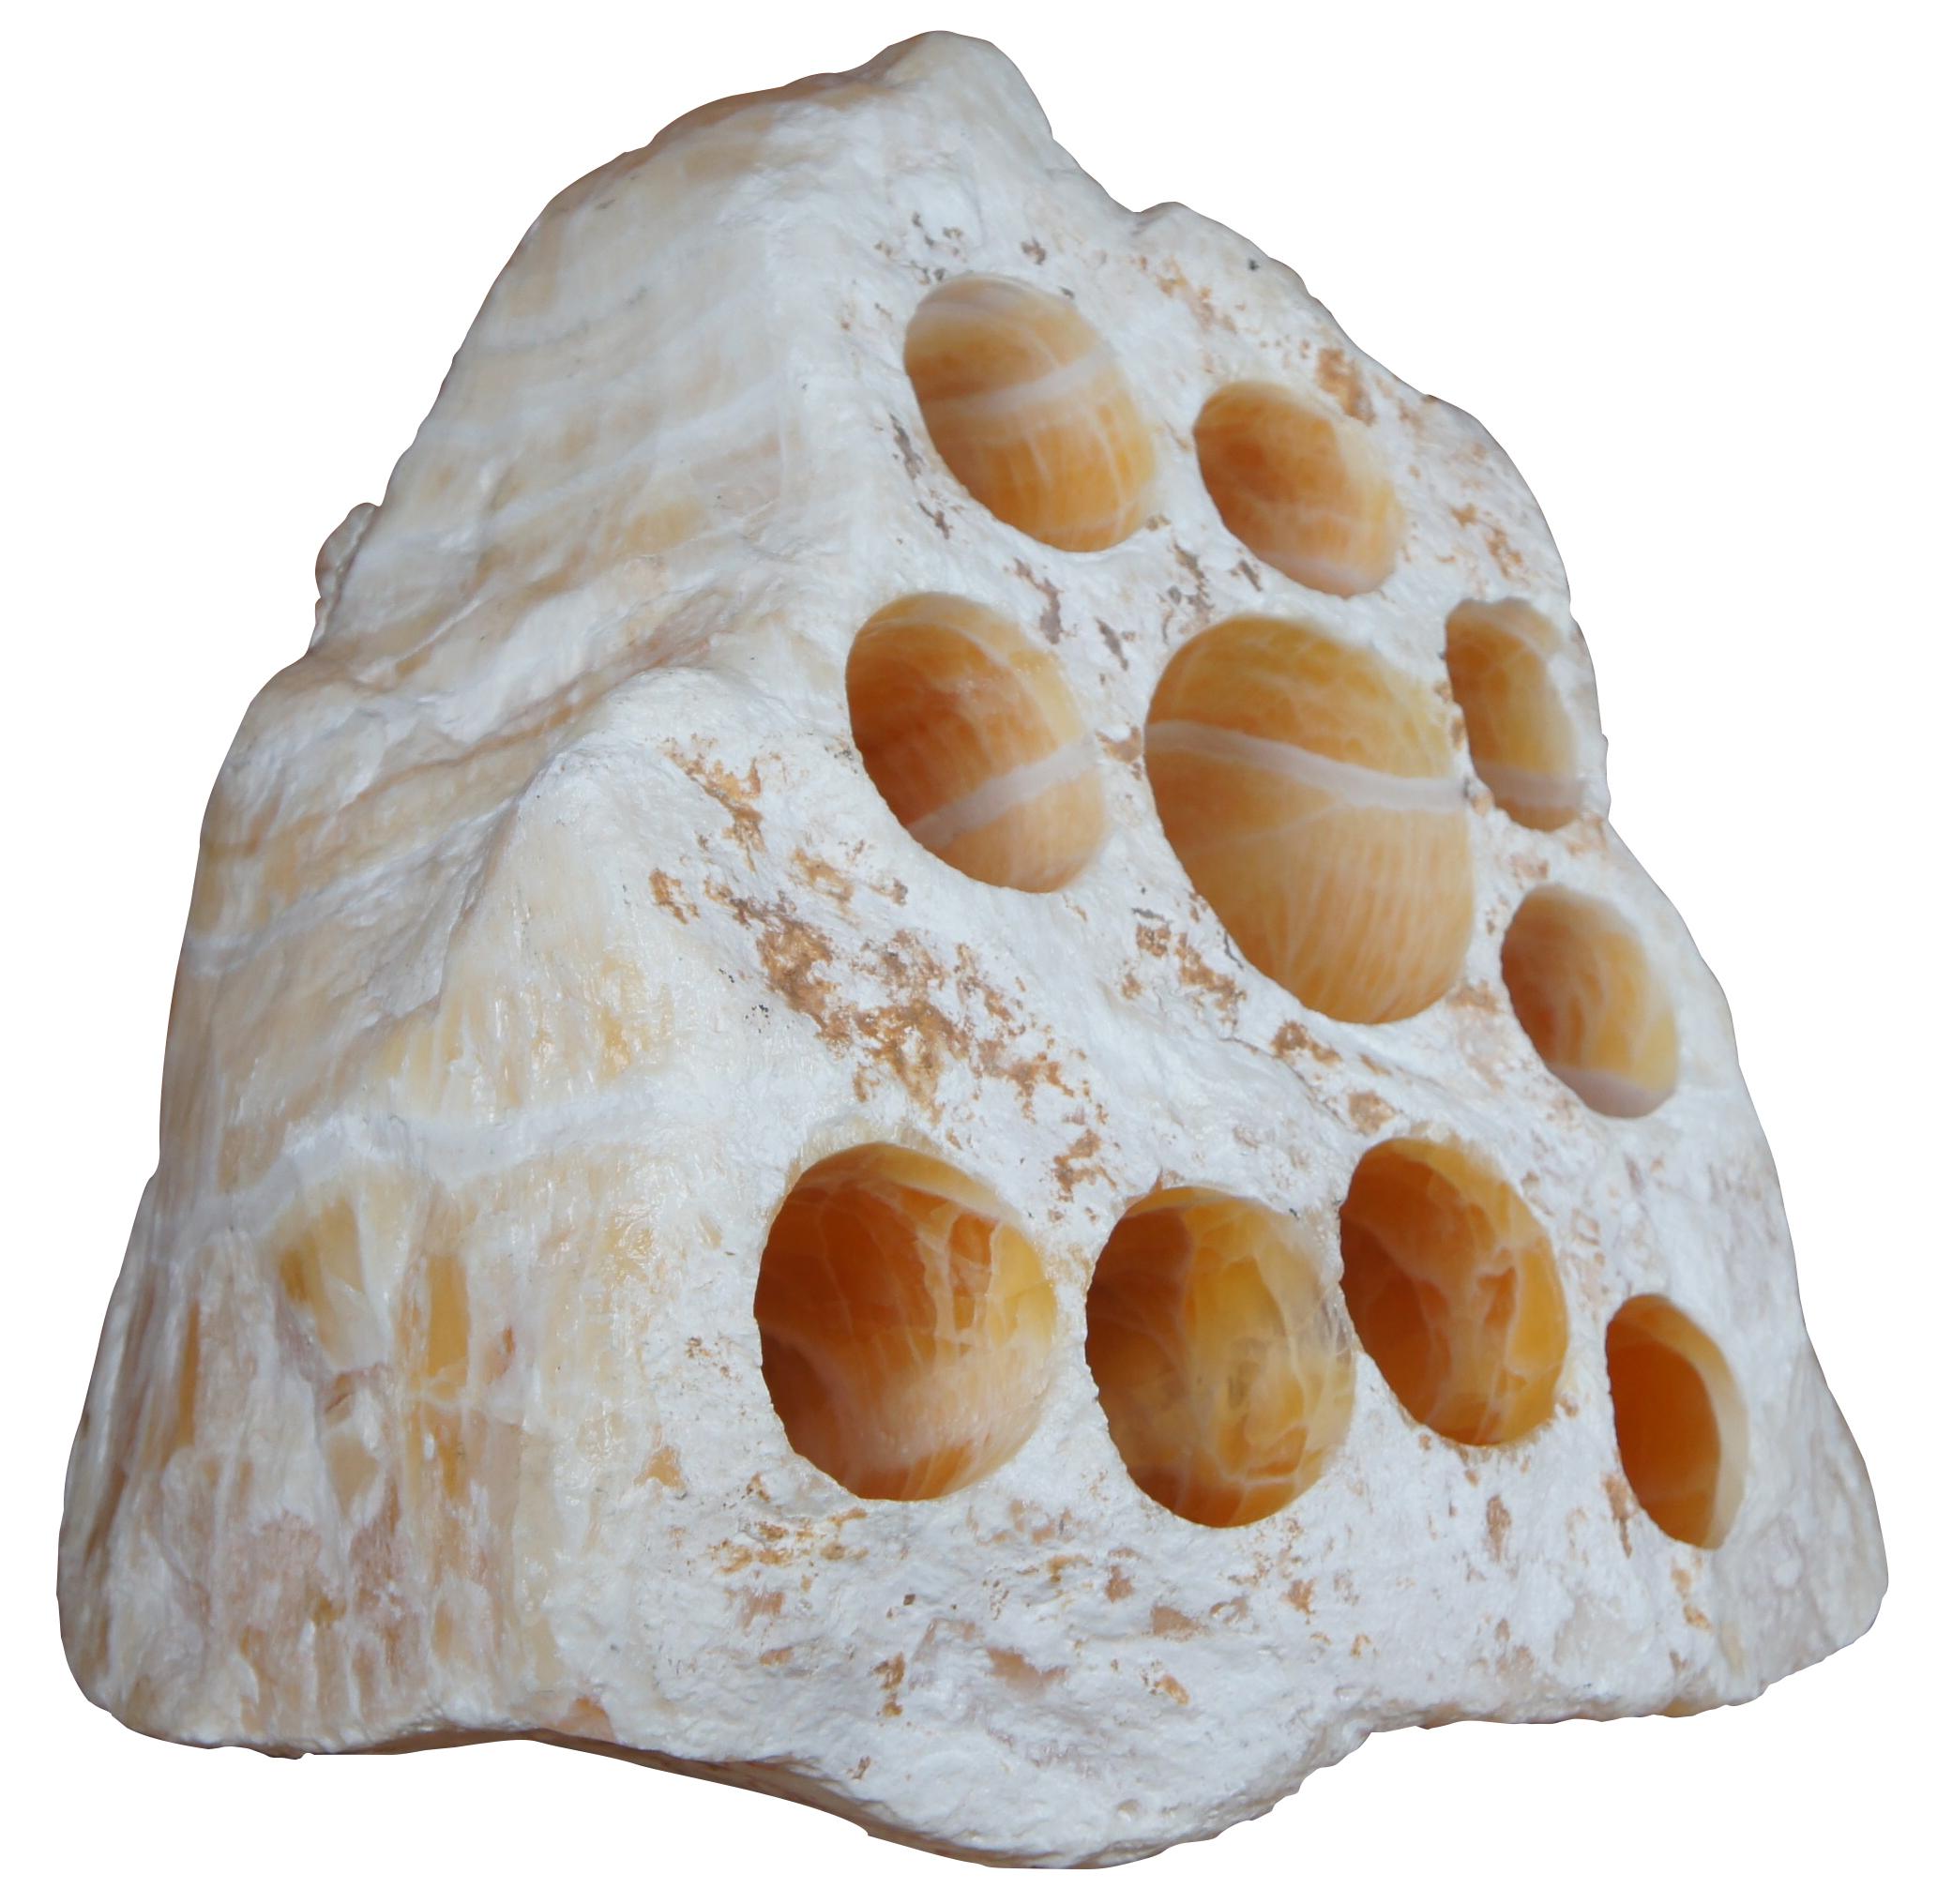 A fine and impressive 102 pound Honeycomb calcite crystal or stone. Features ten drilled holes. The stone is transparent and translucent, offering a luminous glow when accentuated by artificial, direct or indirect lighting. 

Honeycomb Calcite is